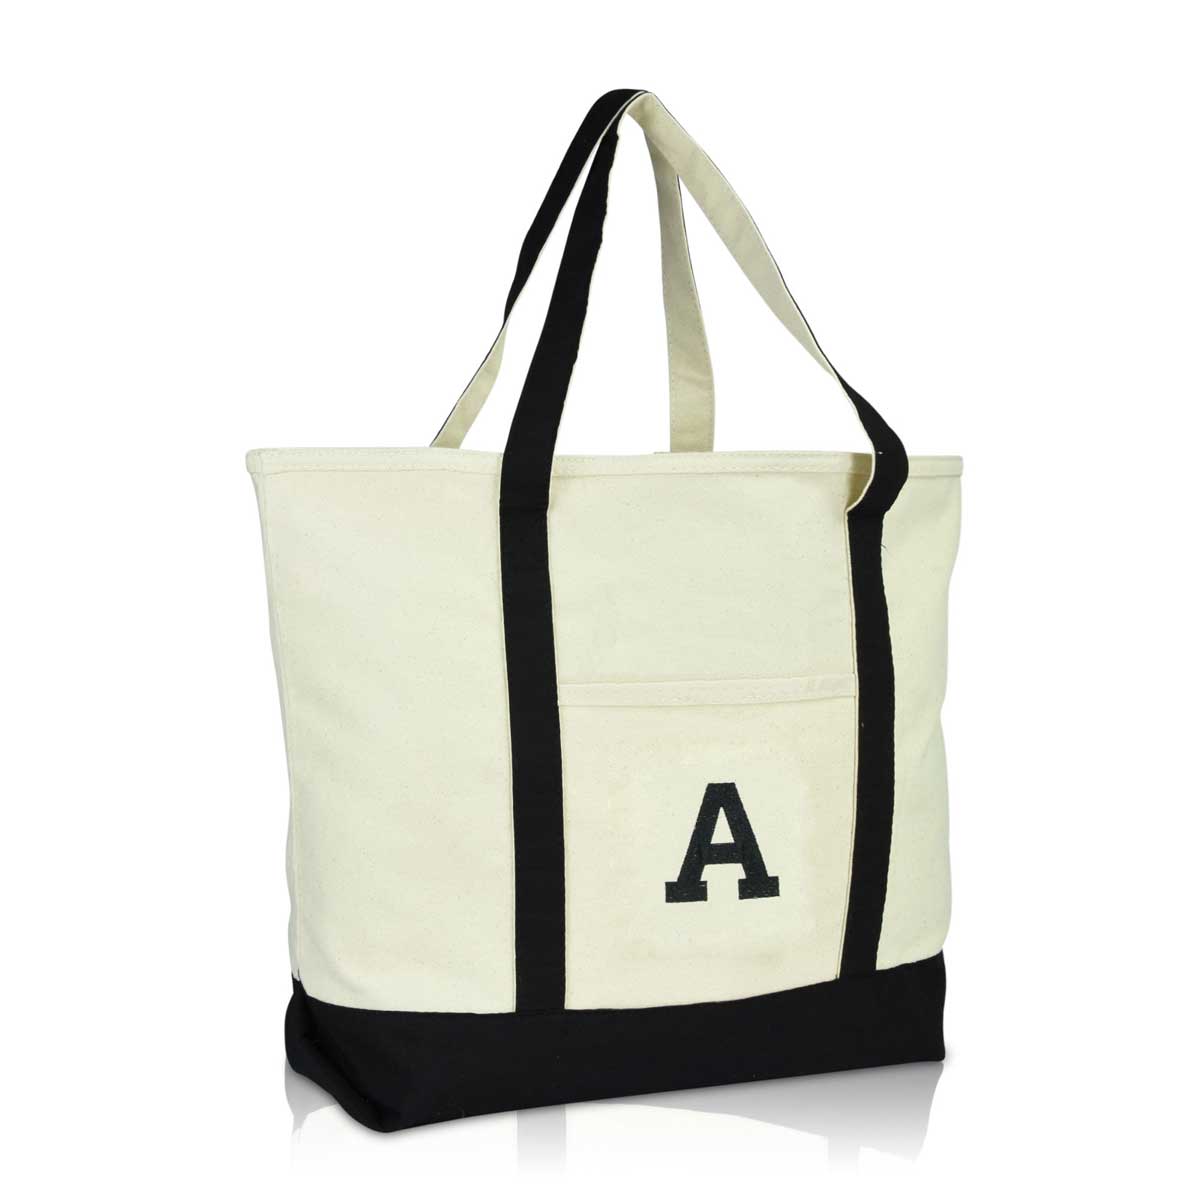 Dalix Initial Tote Bag Zippered Top Embroidered Letter - A | Dalix.com